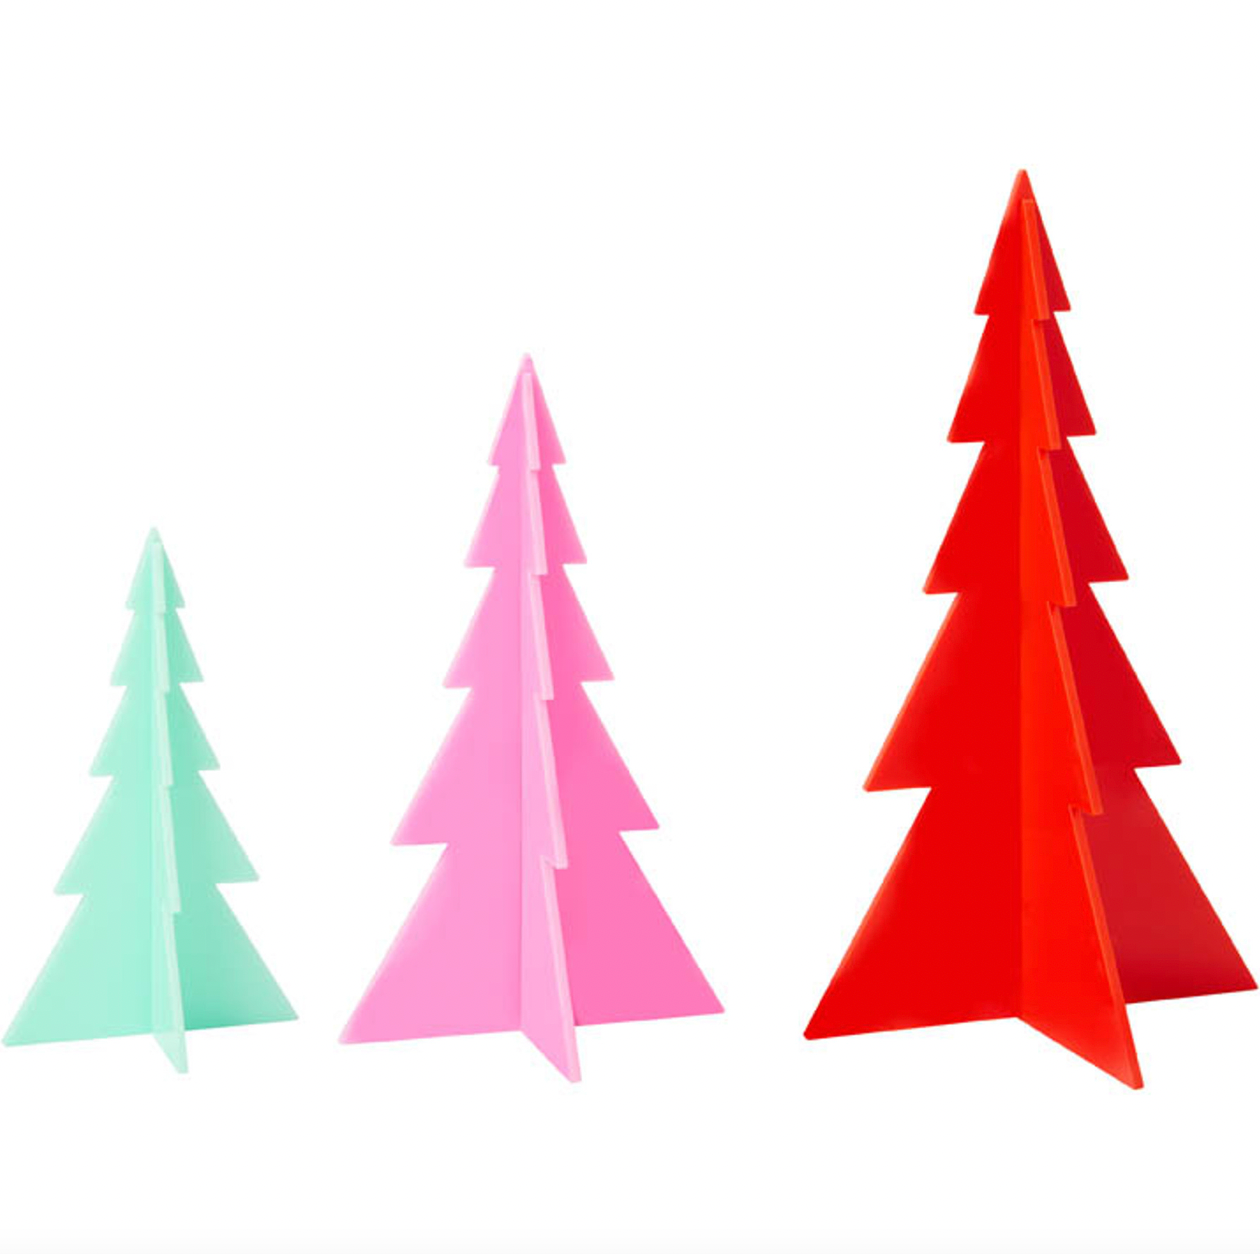 CR Gibson Kailo Chic Acrylic Christmas Trees Set of 3 - Blue, Pink, & Red